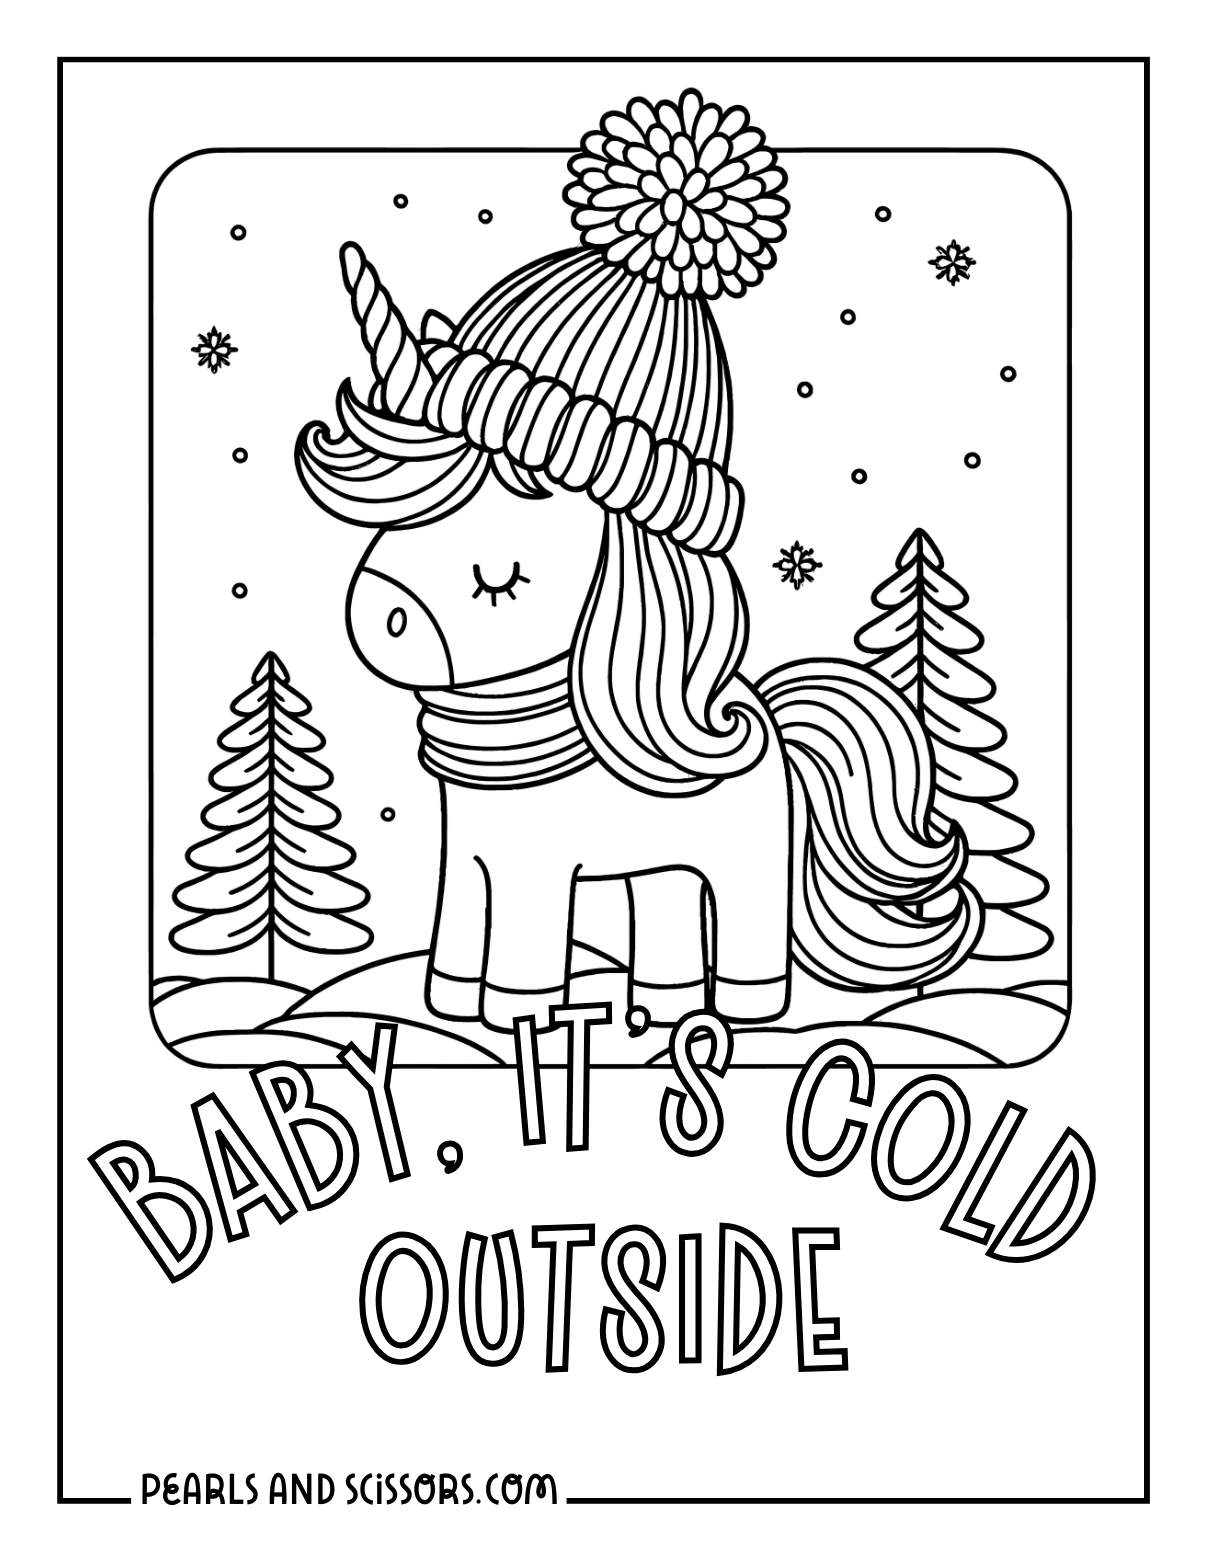 Cute unicorn wearing a winter hat outside christmas coloring page.